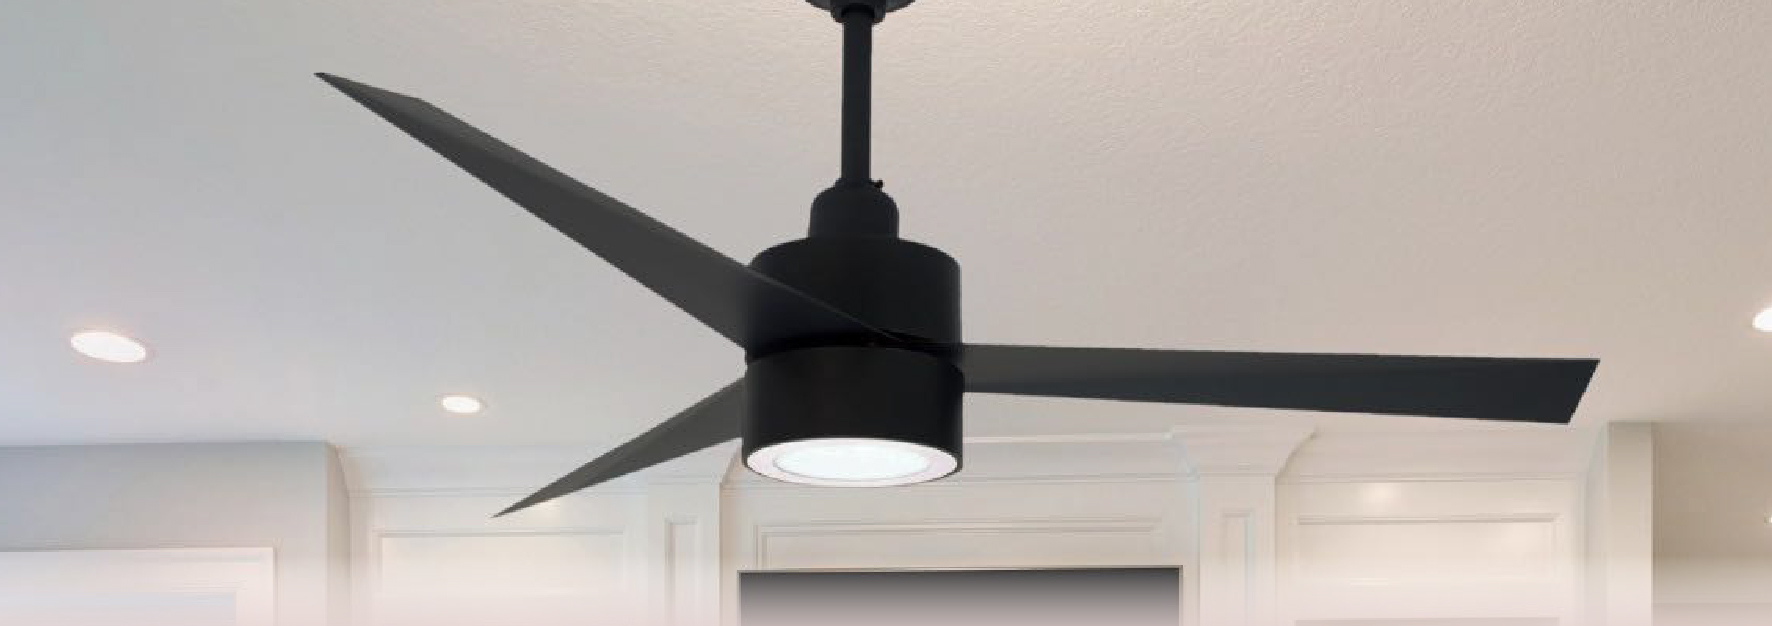 Tips for Cleaning Modern Ceiling Fans!